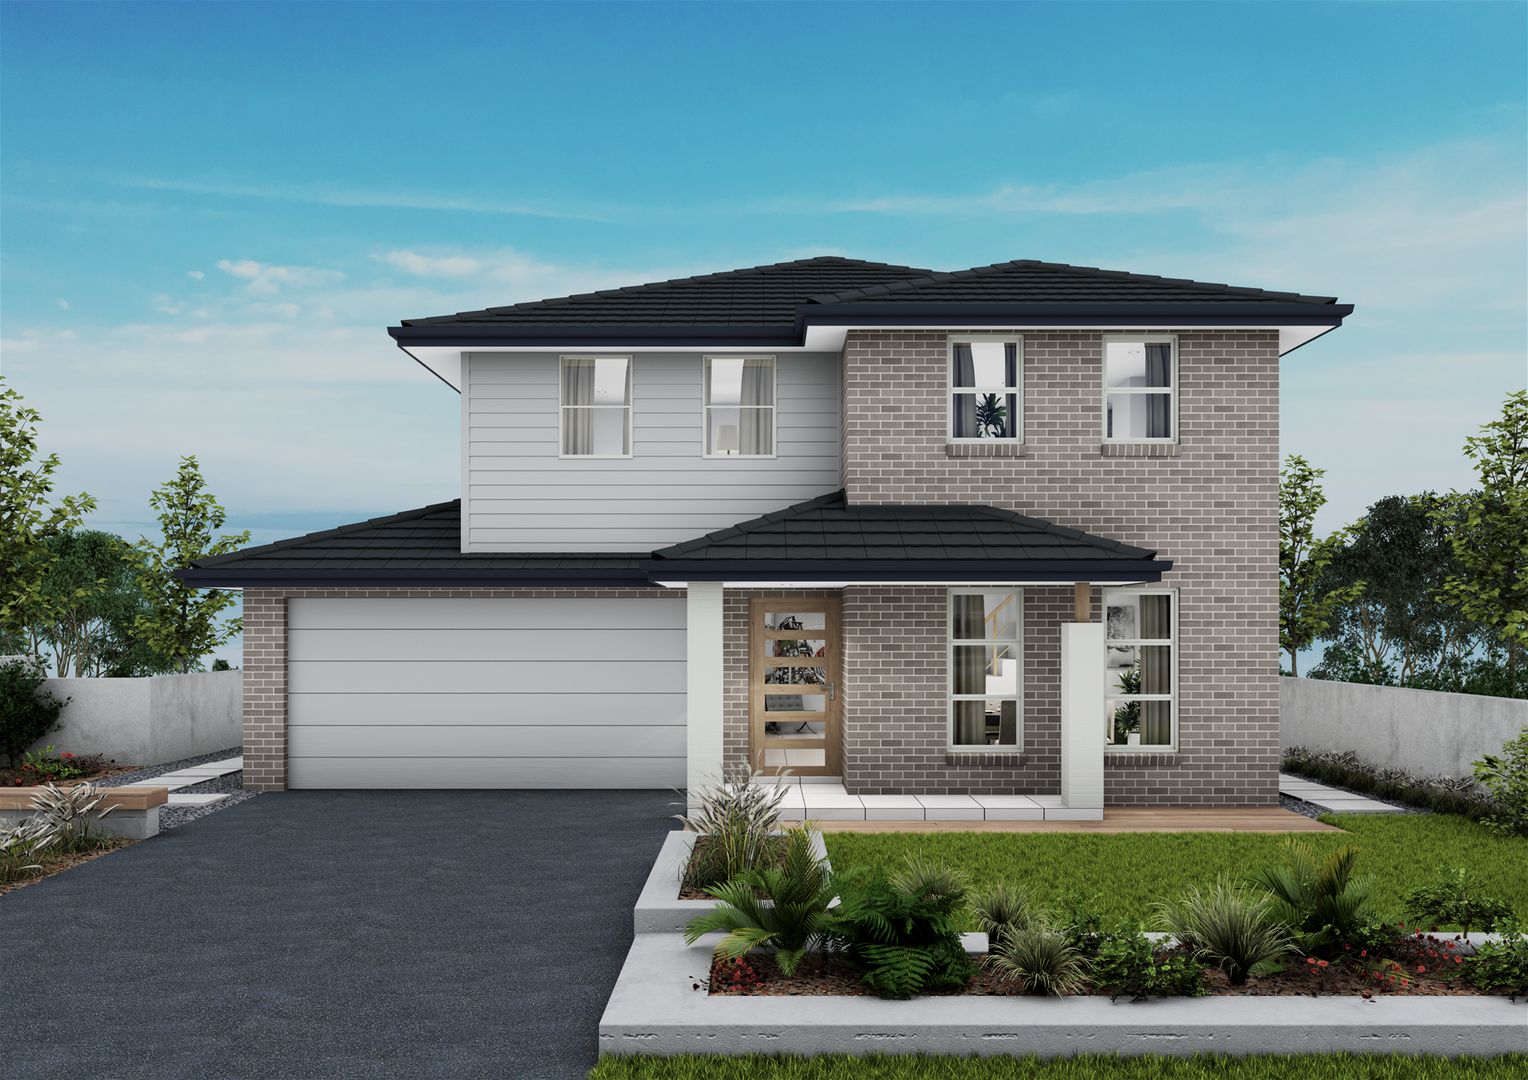 4 bedrooms New House & Land in Lot 7 Proposed Road PRESTONS NSW, 2170